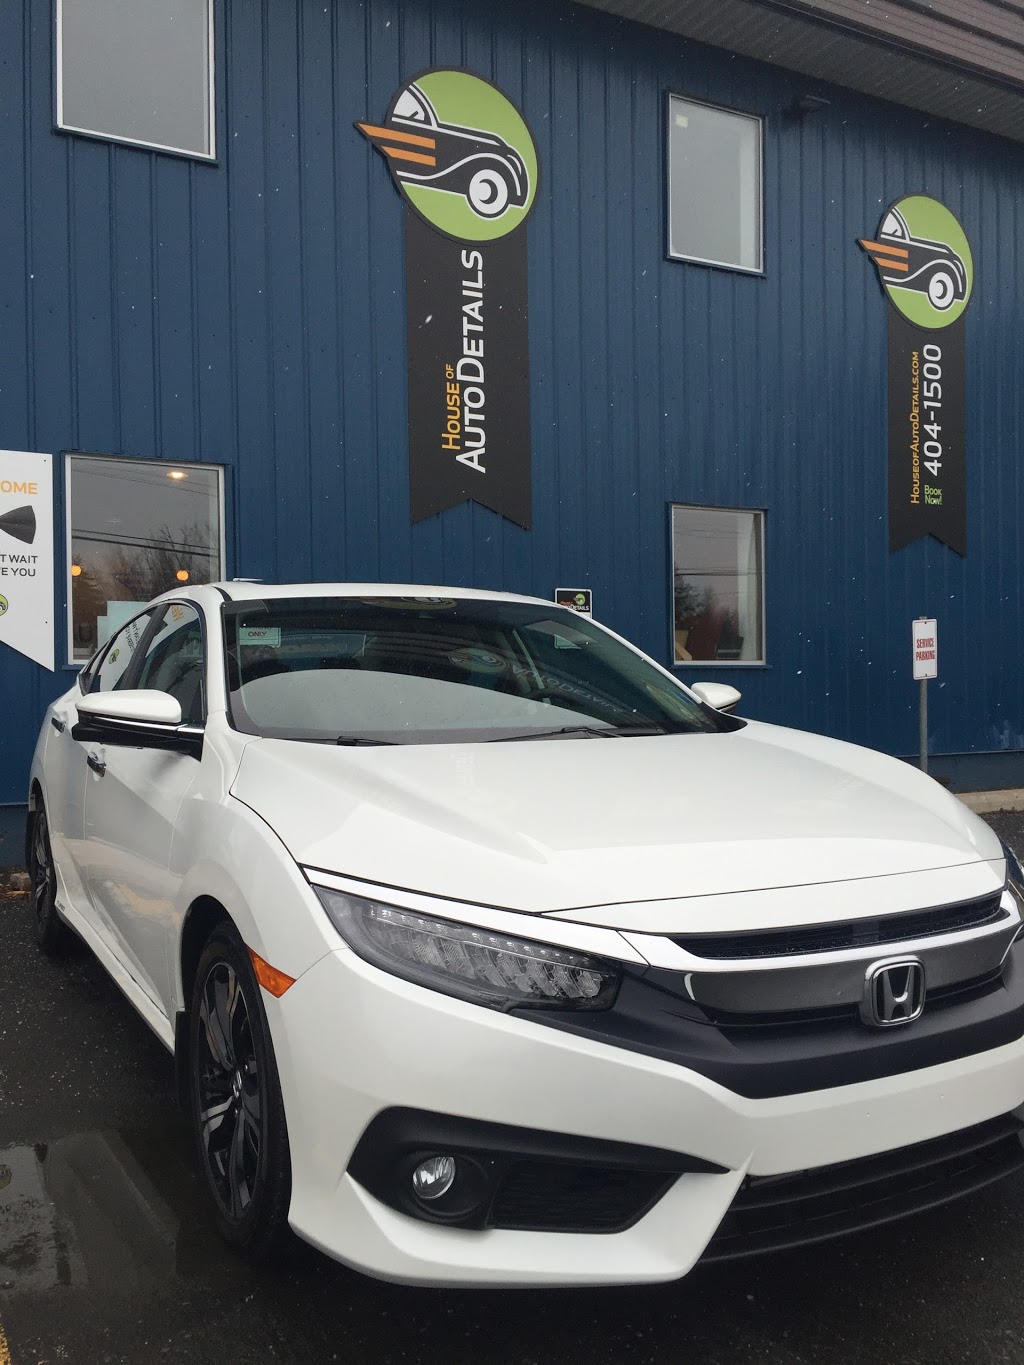 House of Auto Details/Paint Protection & Opti - Coat Pro Install | 9 Symonds Rd, Bedford, NS B4B 1J5, Canada | Phone: (902) 404-1500